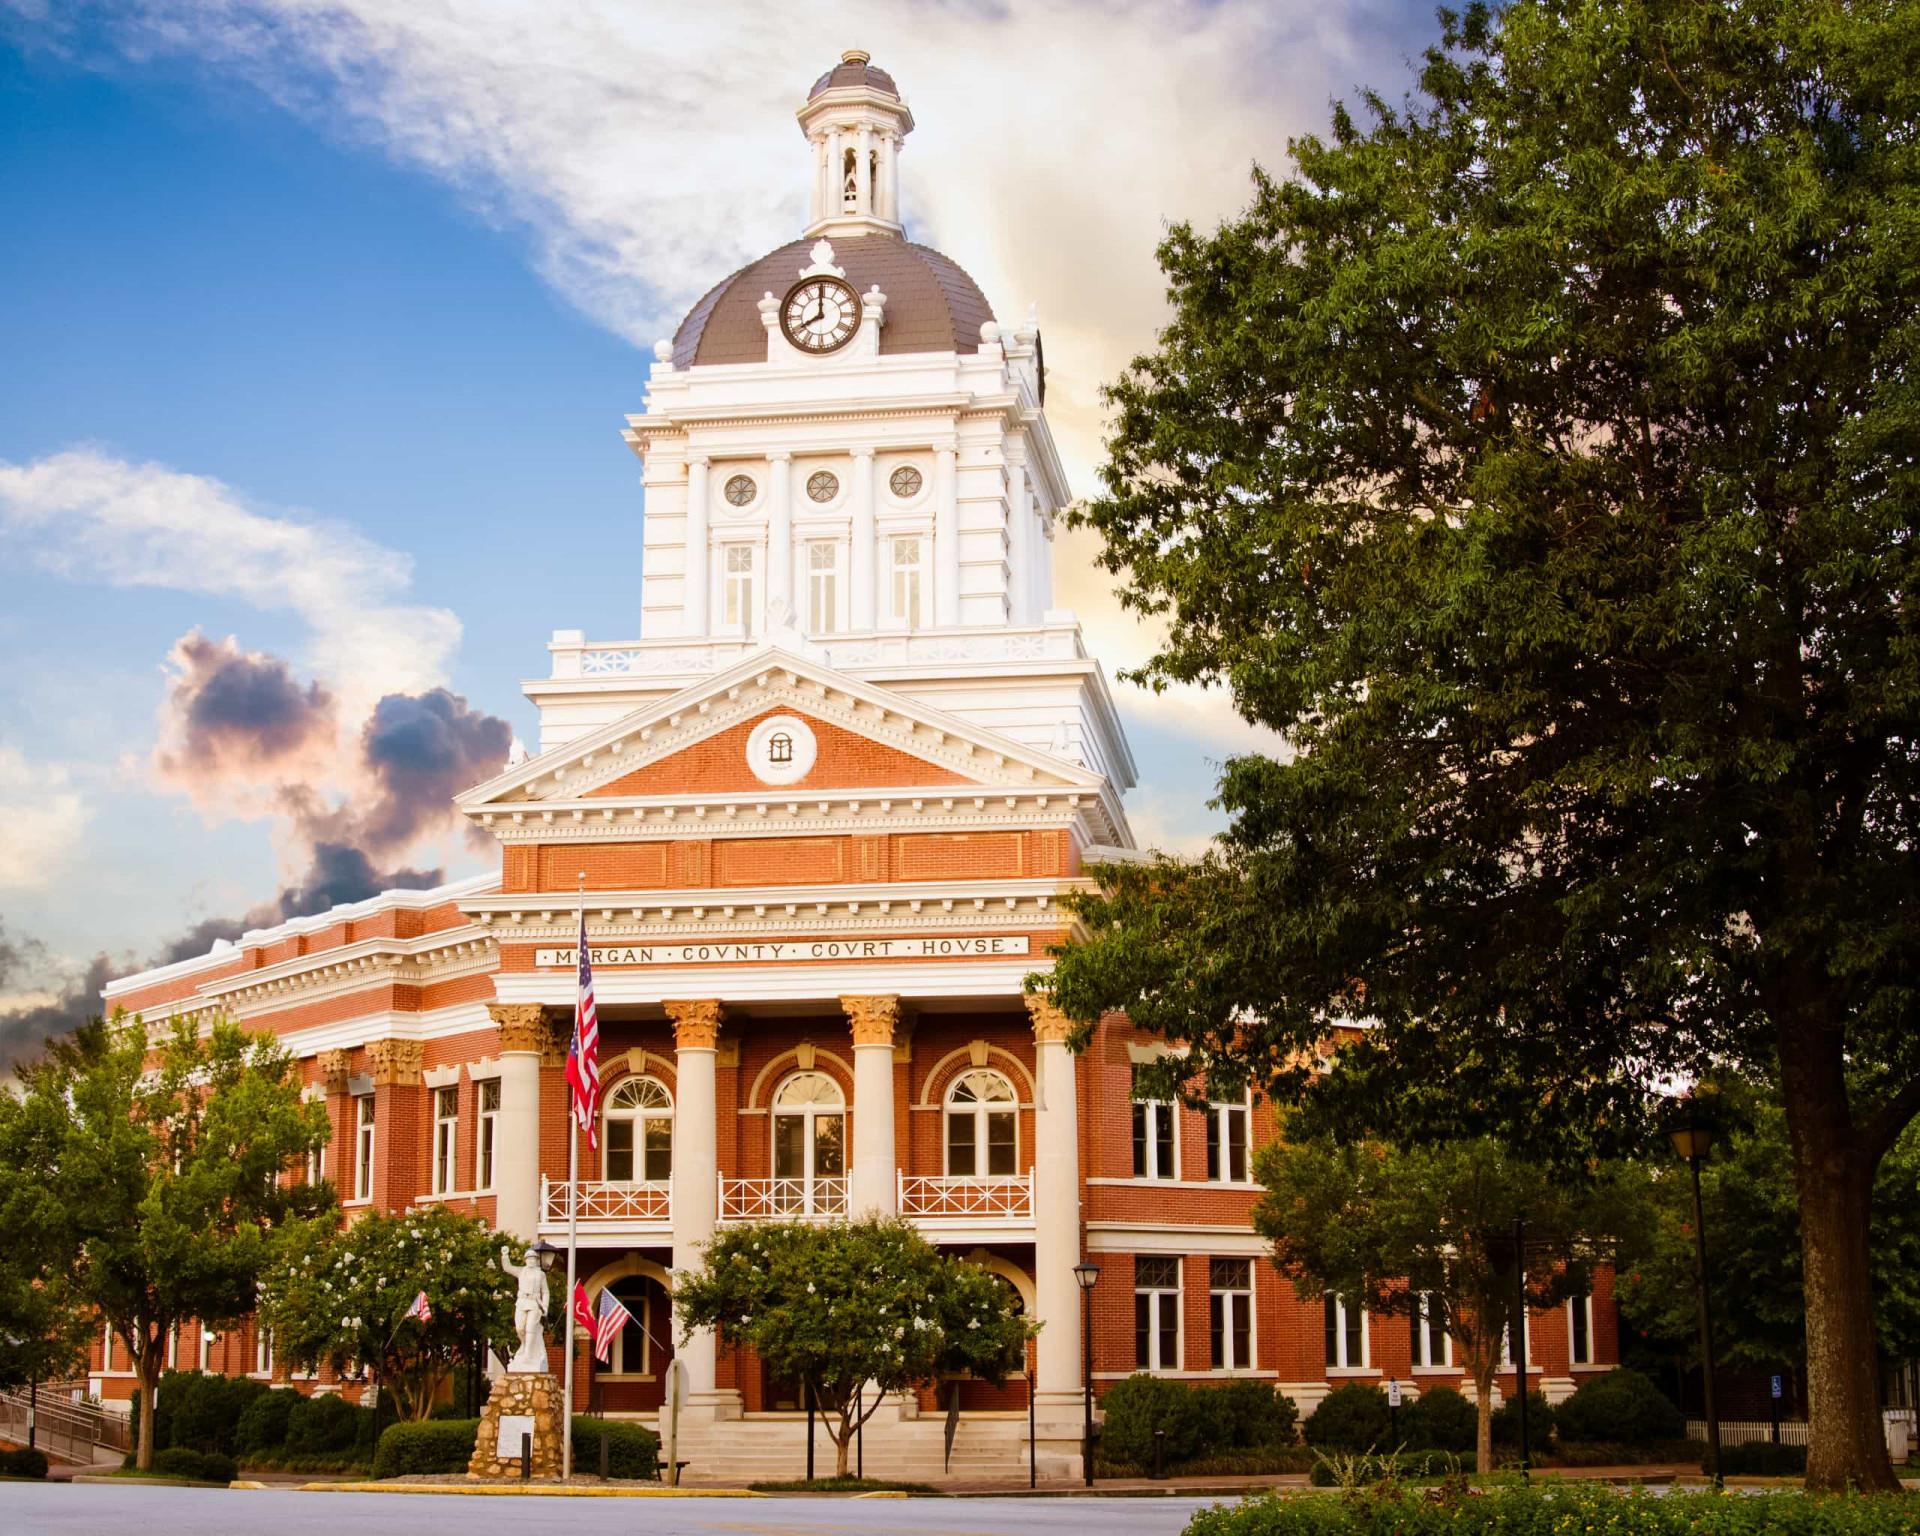 <p>Georgia is home to some seriously picturesque small towns, of which Madison is a shining example. Frequently voted among America's prettiest small towns, it's known for its warm welcome as well as its impressive architecture.</p><p>You may also like:<a href="https://www.starsinsider.com/n/362460?utm_source=msn.com&utm_medium=display&utm_campaign=referral_description&utm_content=487017v3en-us"> The world's most breathtaking landscapes seen from above</a></p>